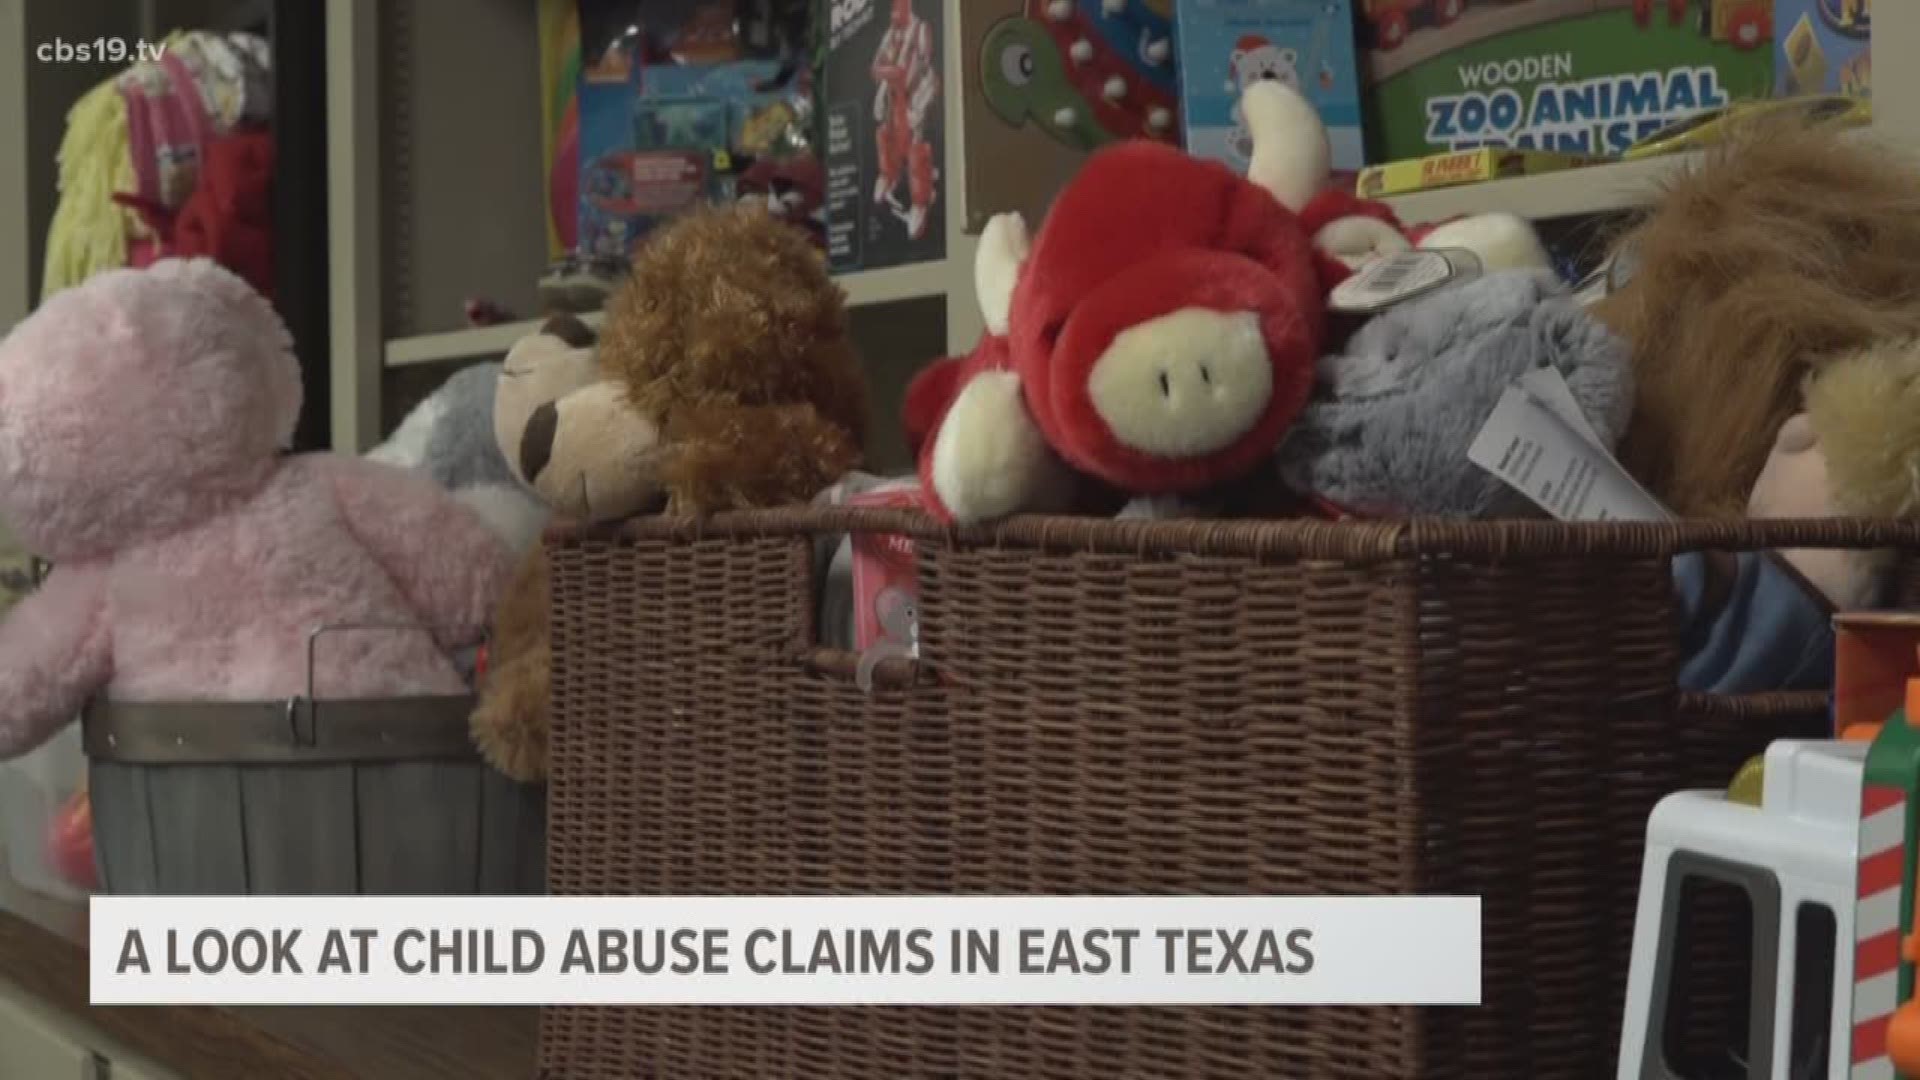 With recent news of alleged child abuse cases in different East Texas counties, CBS19 looked into the statistics for child abuse claims made in 2018.